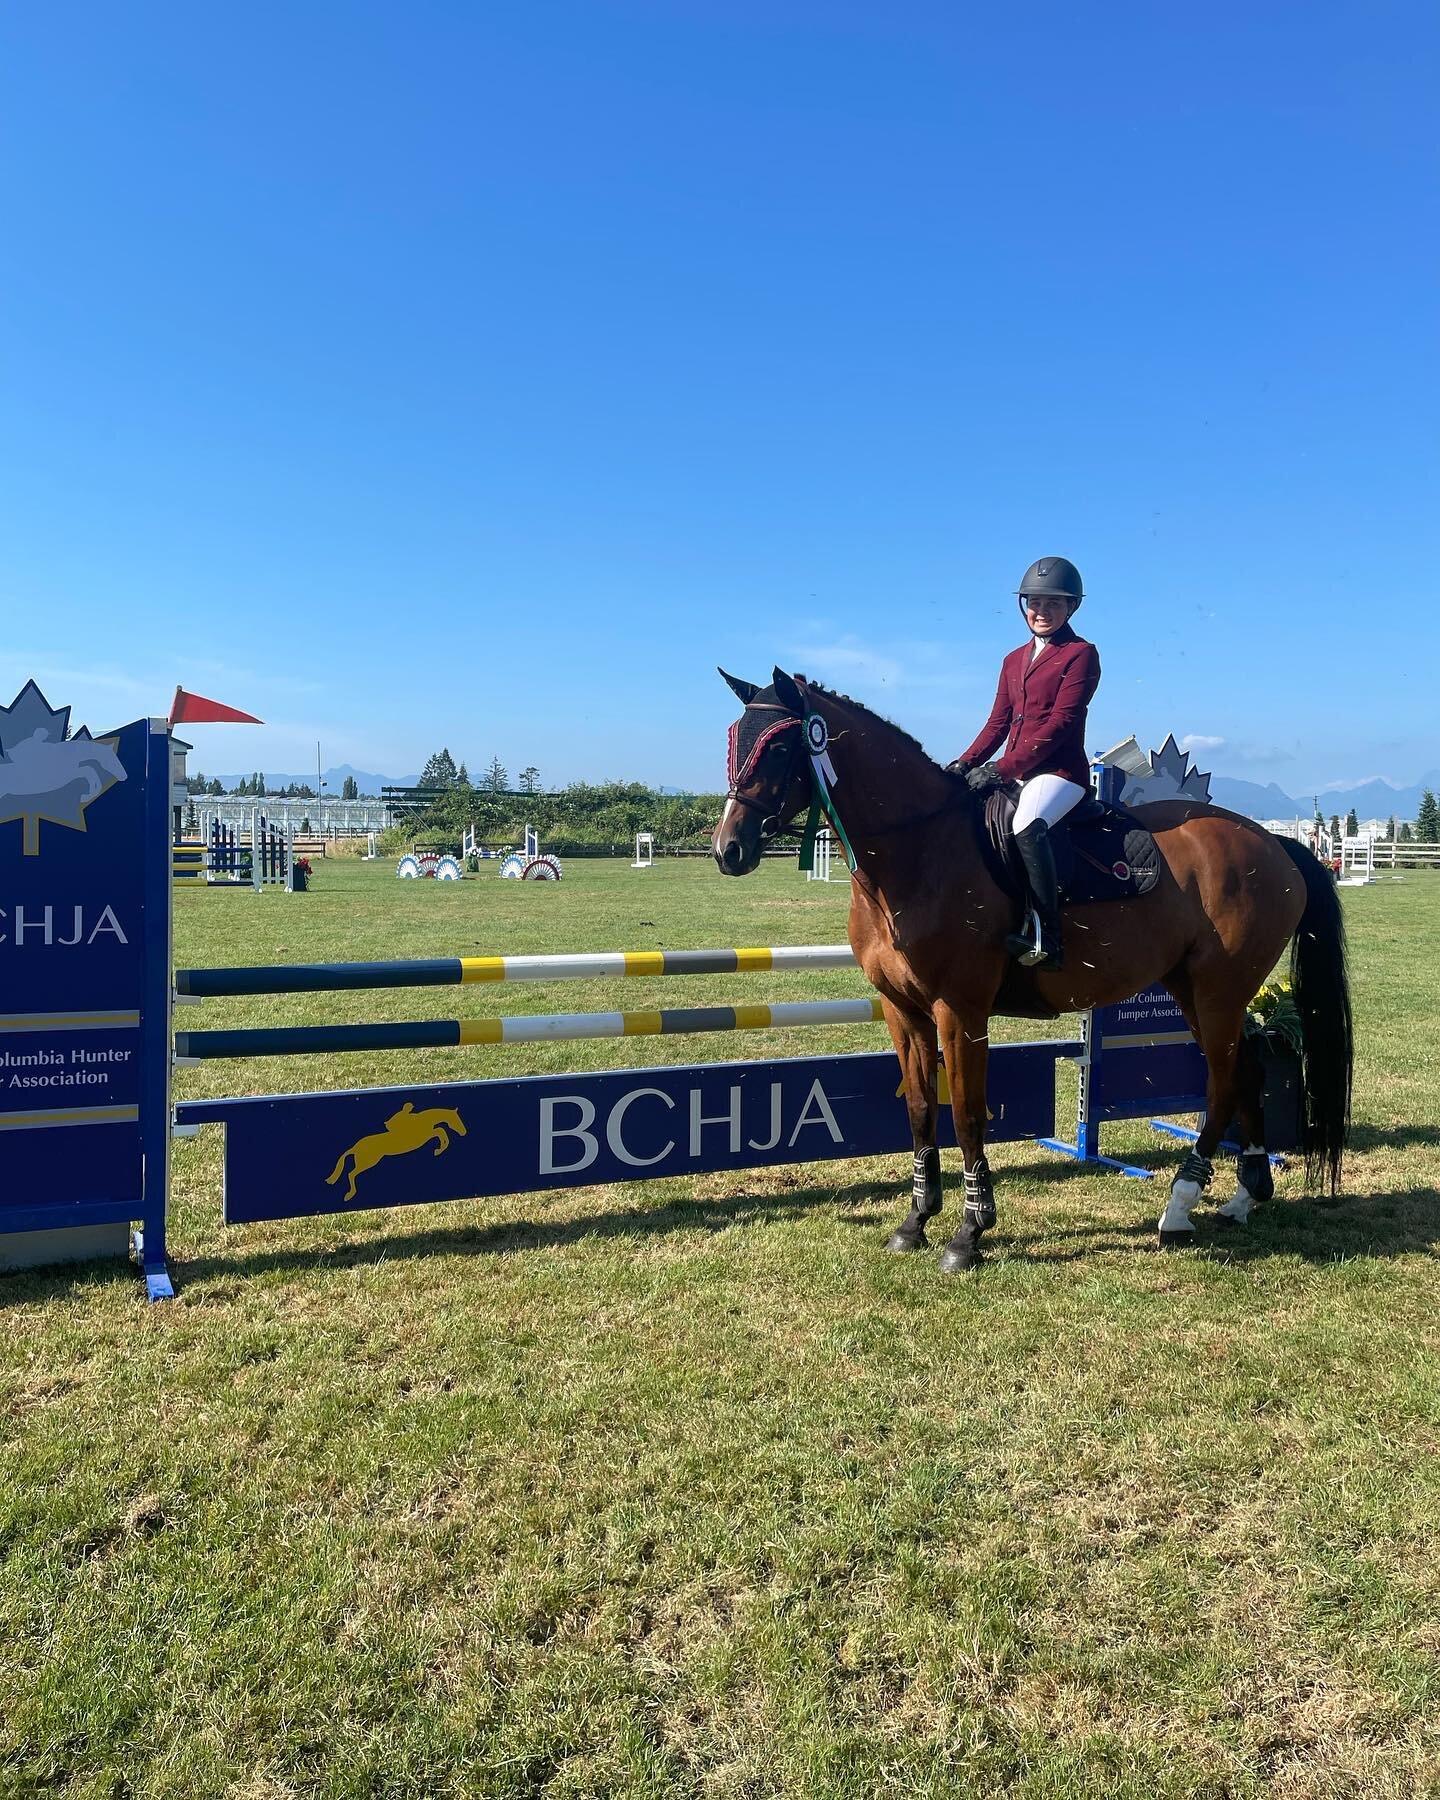 BCHJA Ride of the Day goes to Sloane Betker!